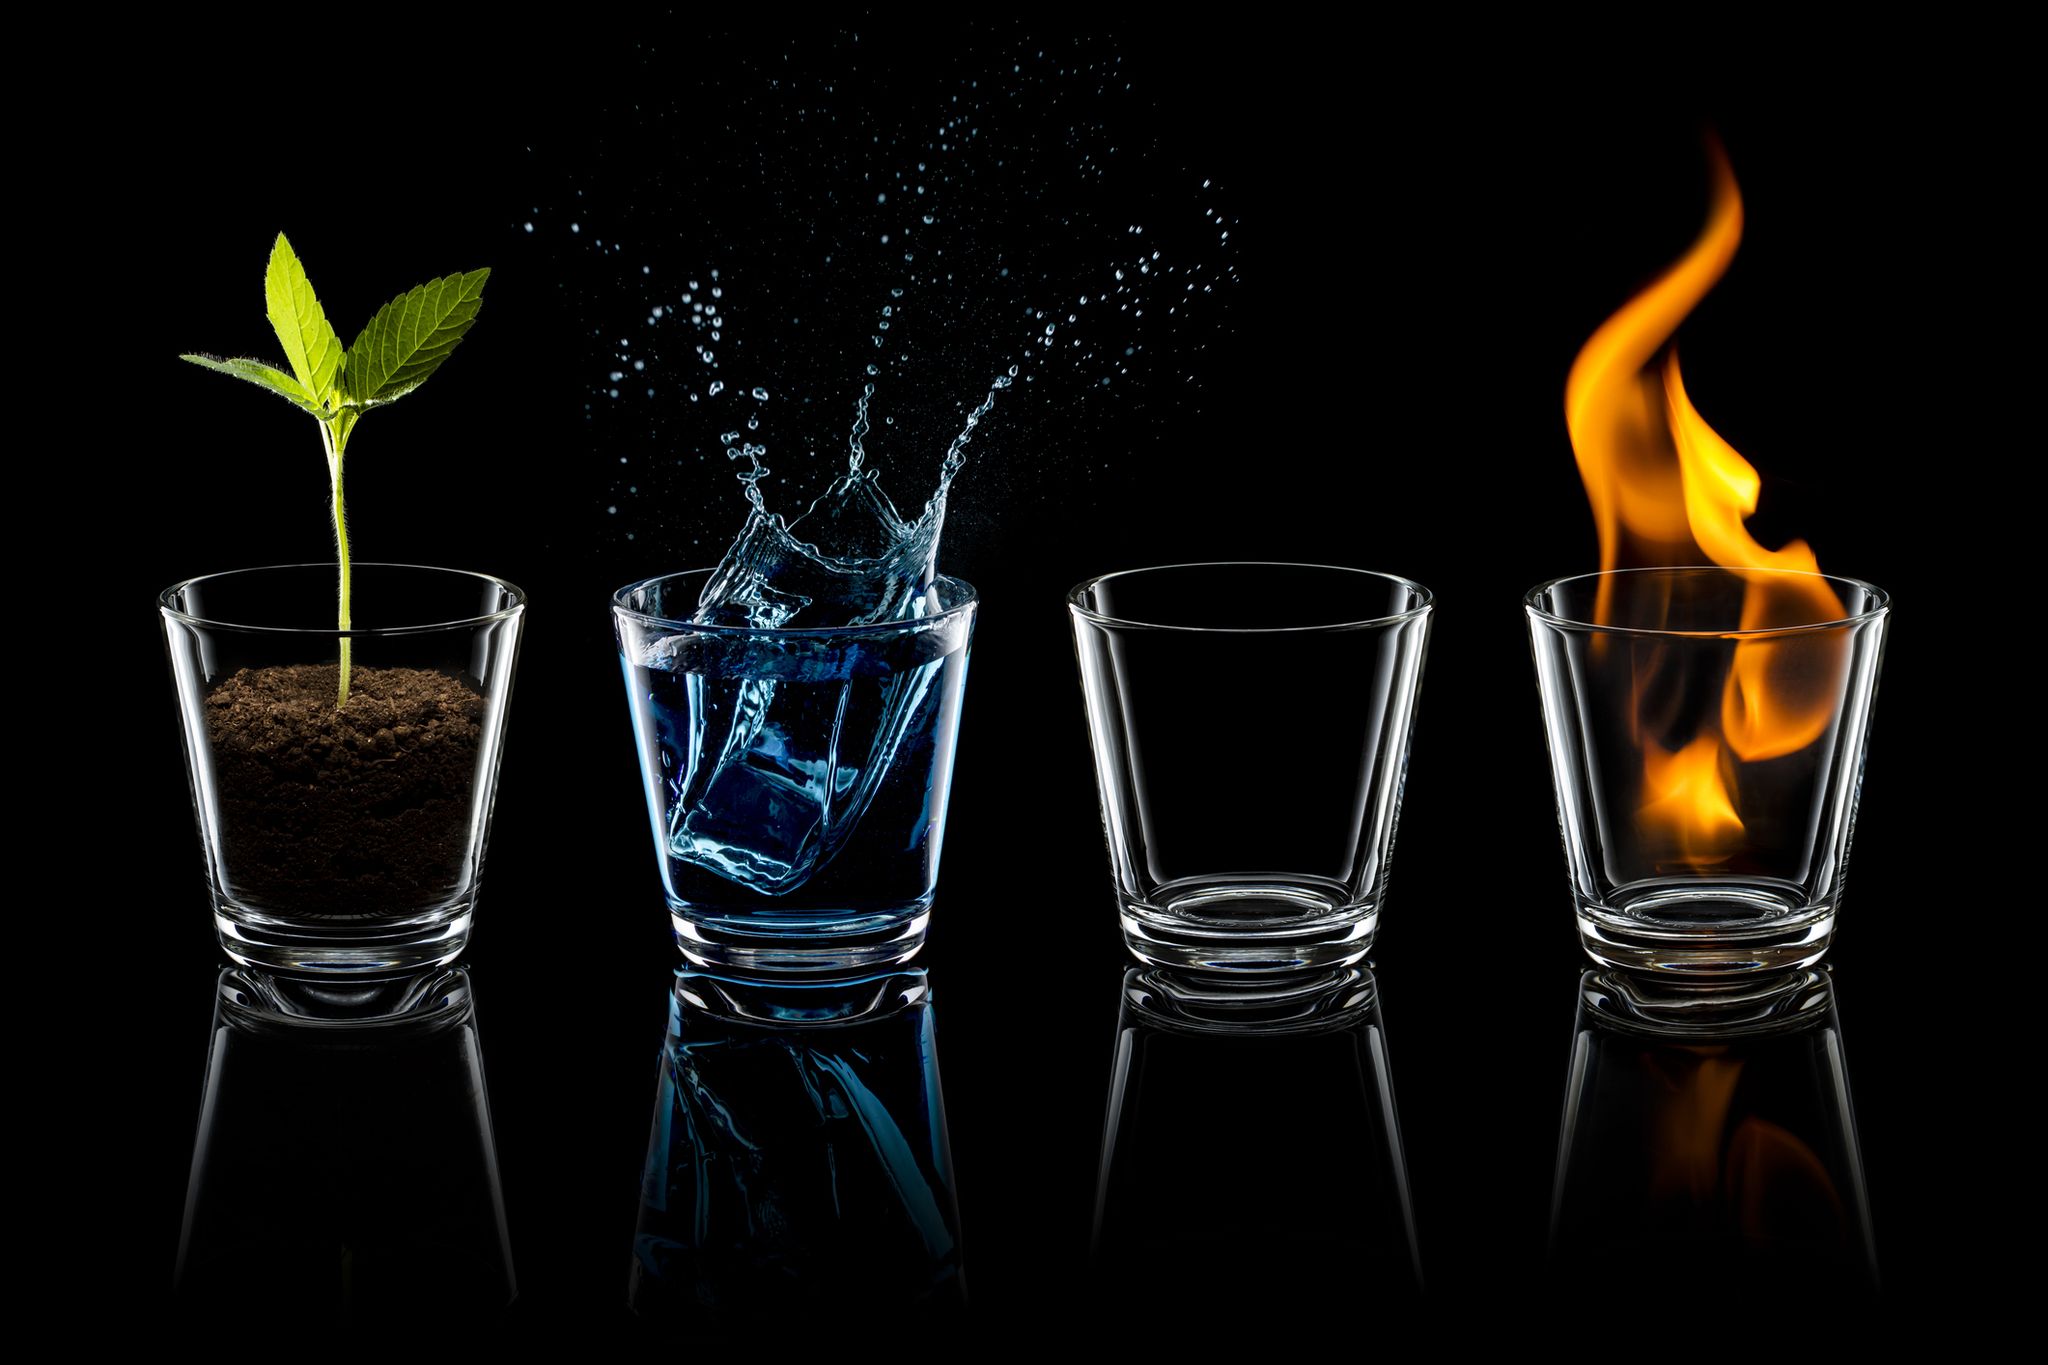 water and fire background